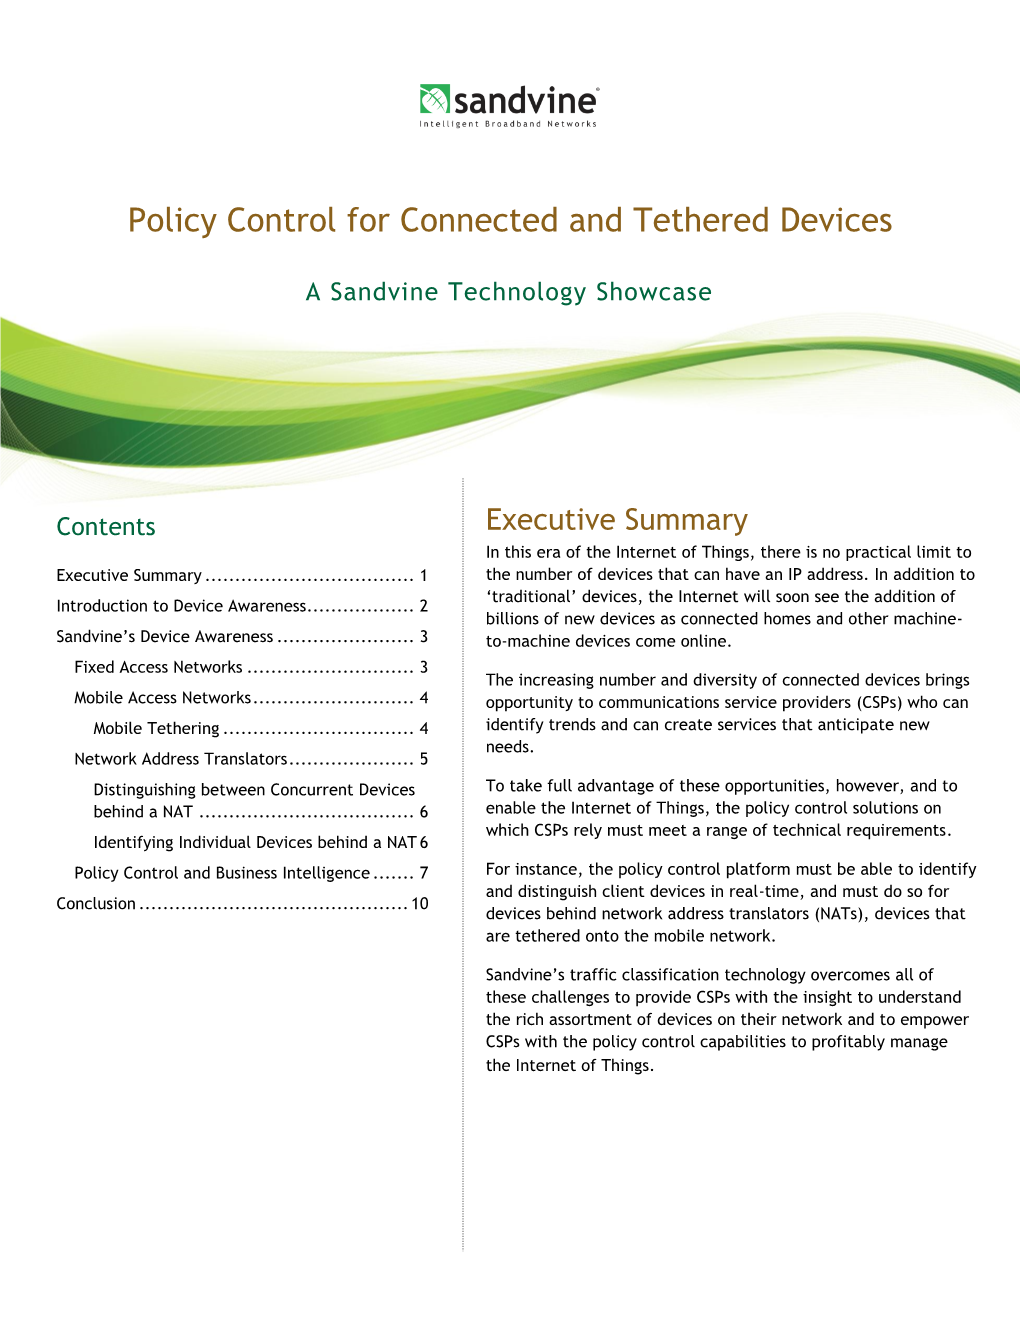 Policy Control for Connected and Tethered Devices